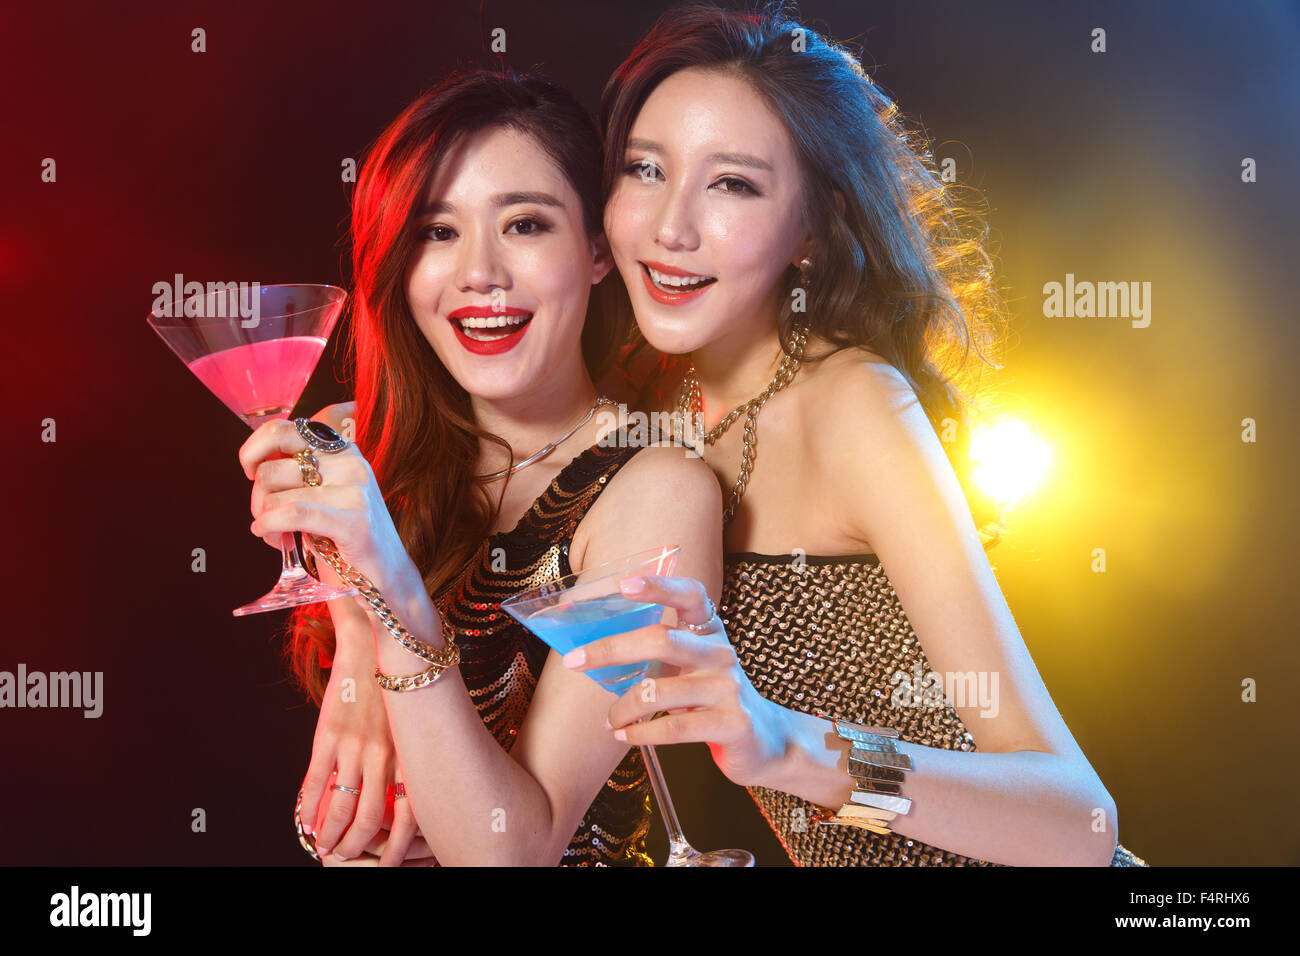 Young women drinking in a bar Stock Photo